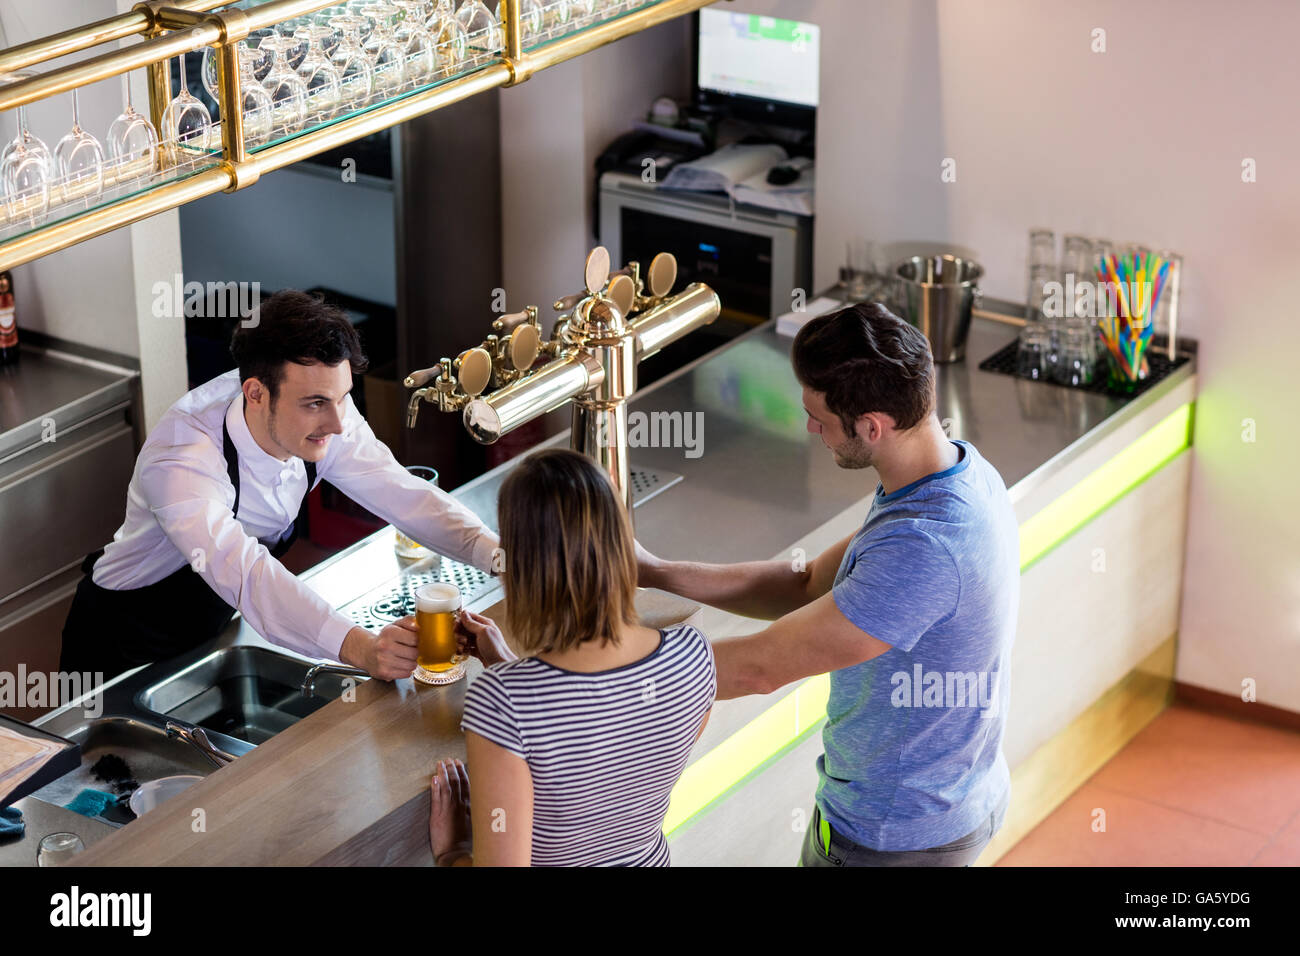 Barkeeper serving beer to couple Stock Photo